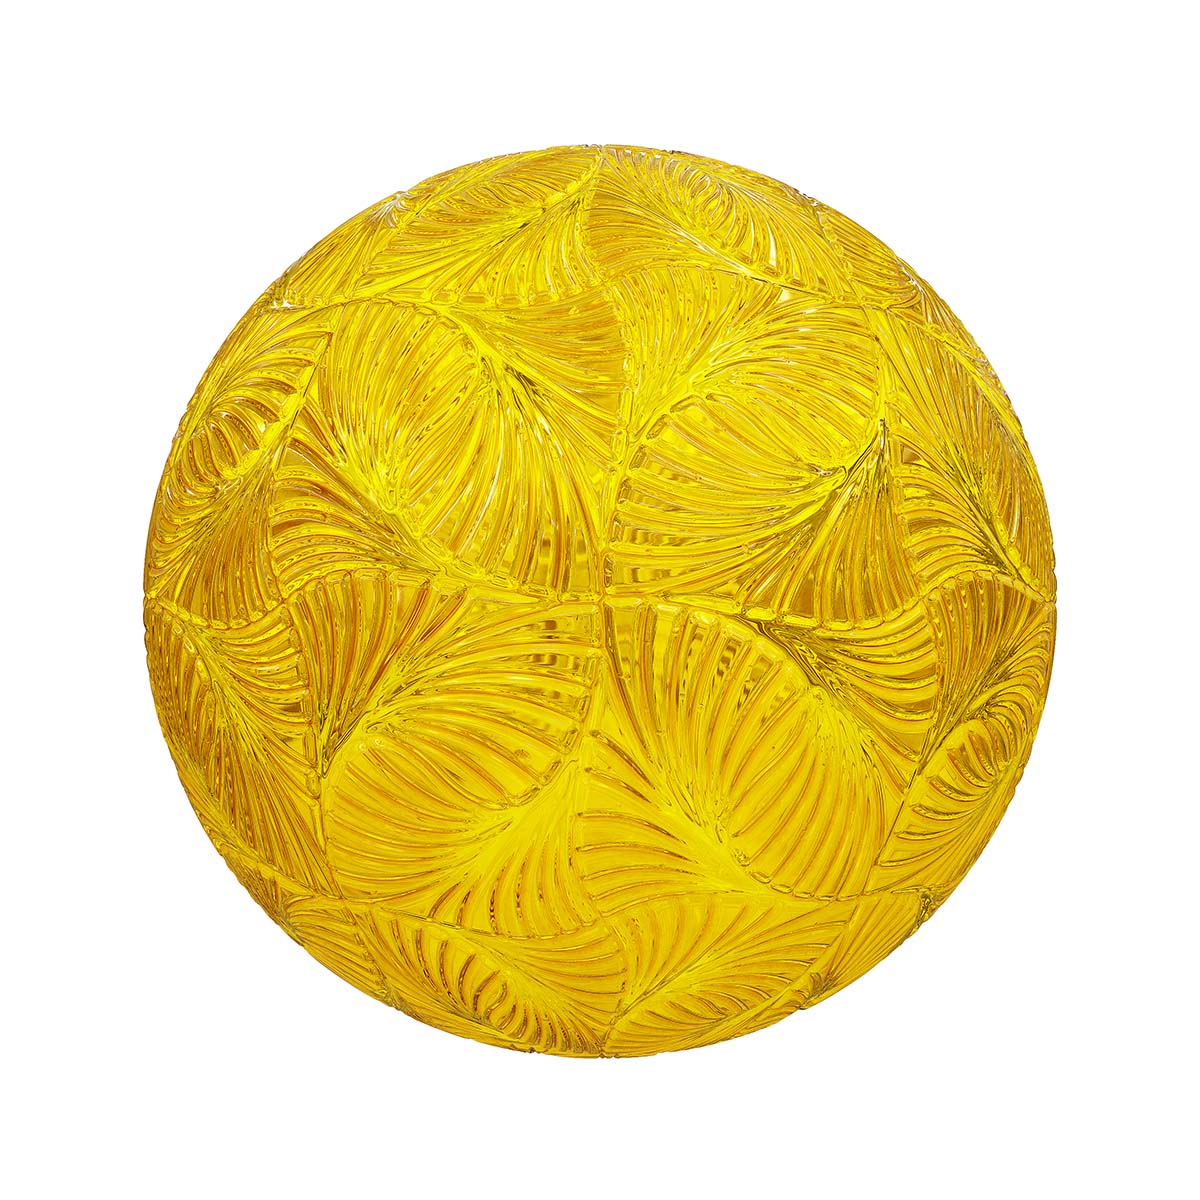 Yellow Patterned Glass PBR Texture